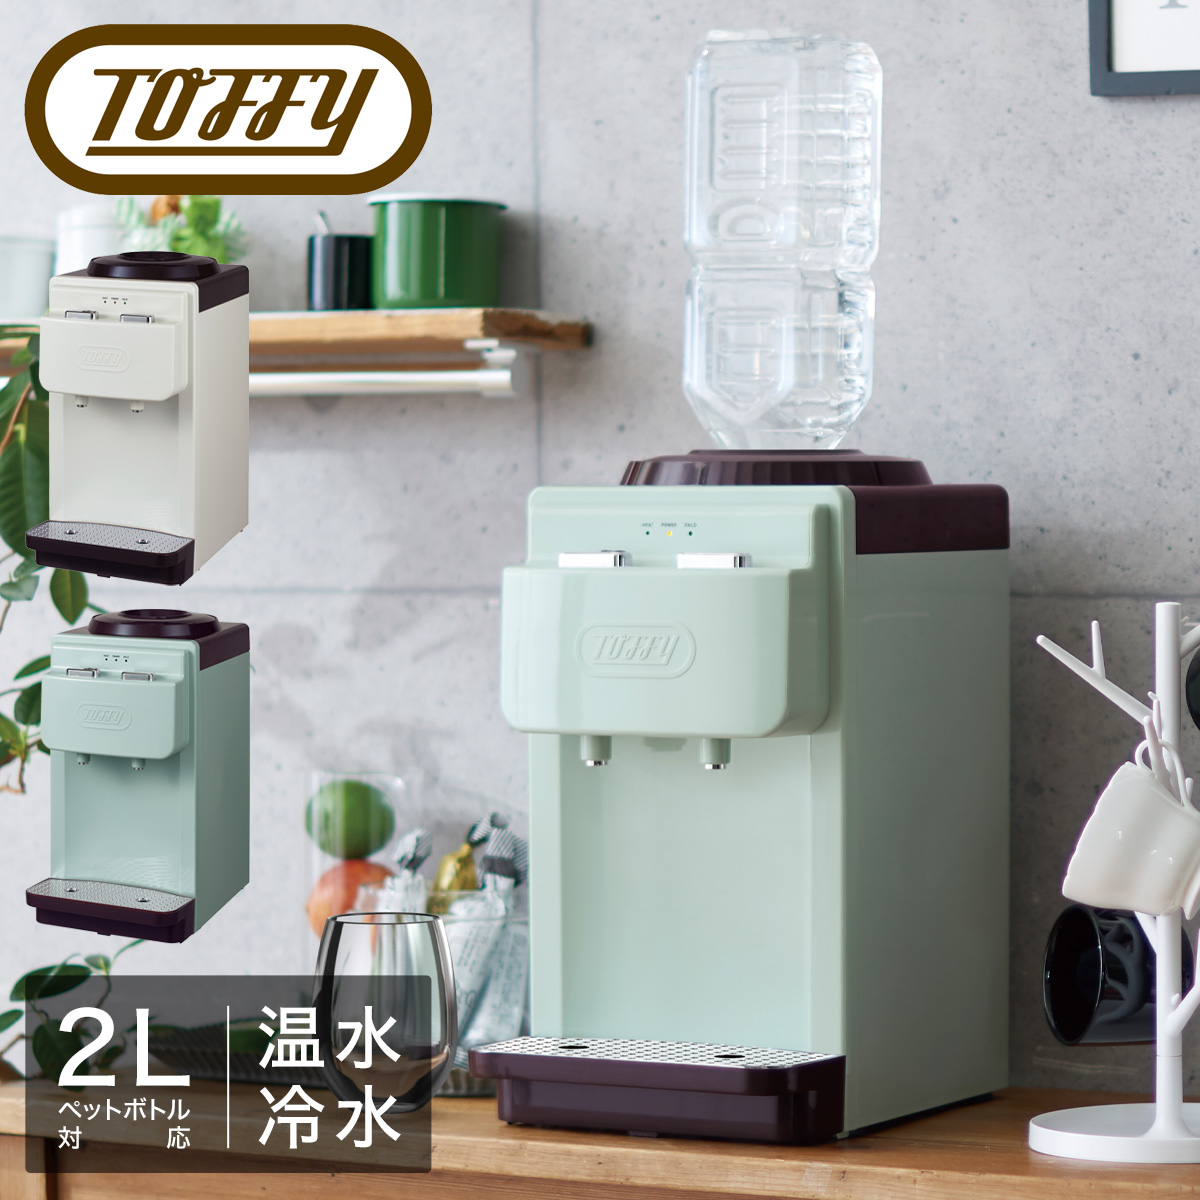 tofi- water server desk-top type PET bottle exclusive use 2L K-WS2 Toffy temperature cold both for cold water hot water water supply machine 2 liter small size compact LADONNA Rodan na1 year guarantee 